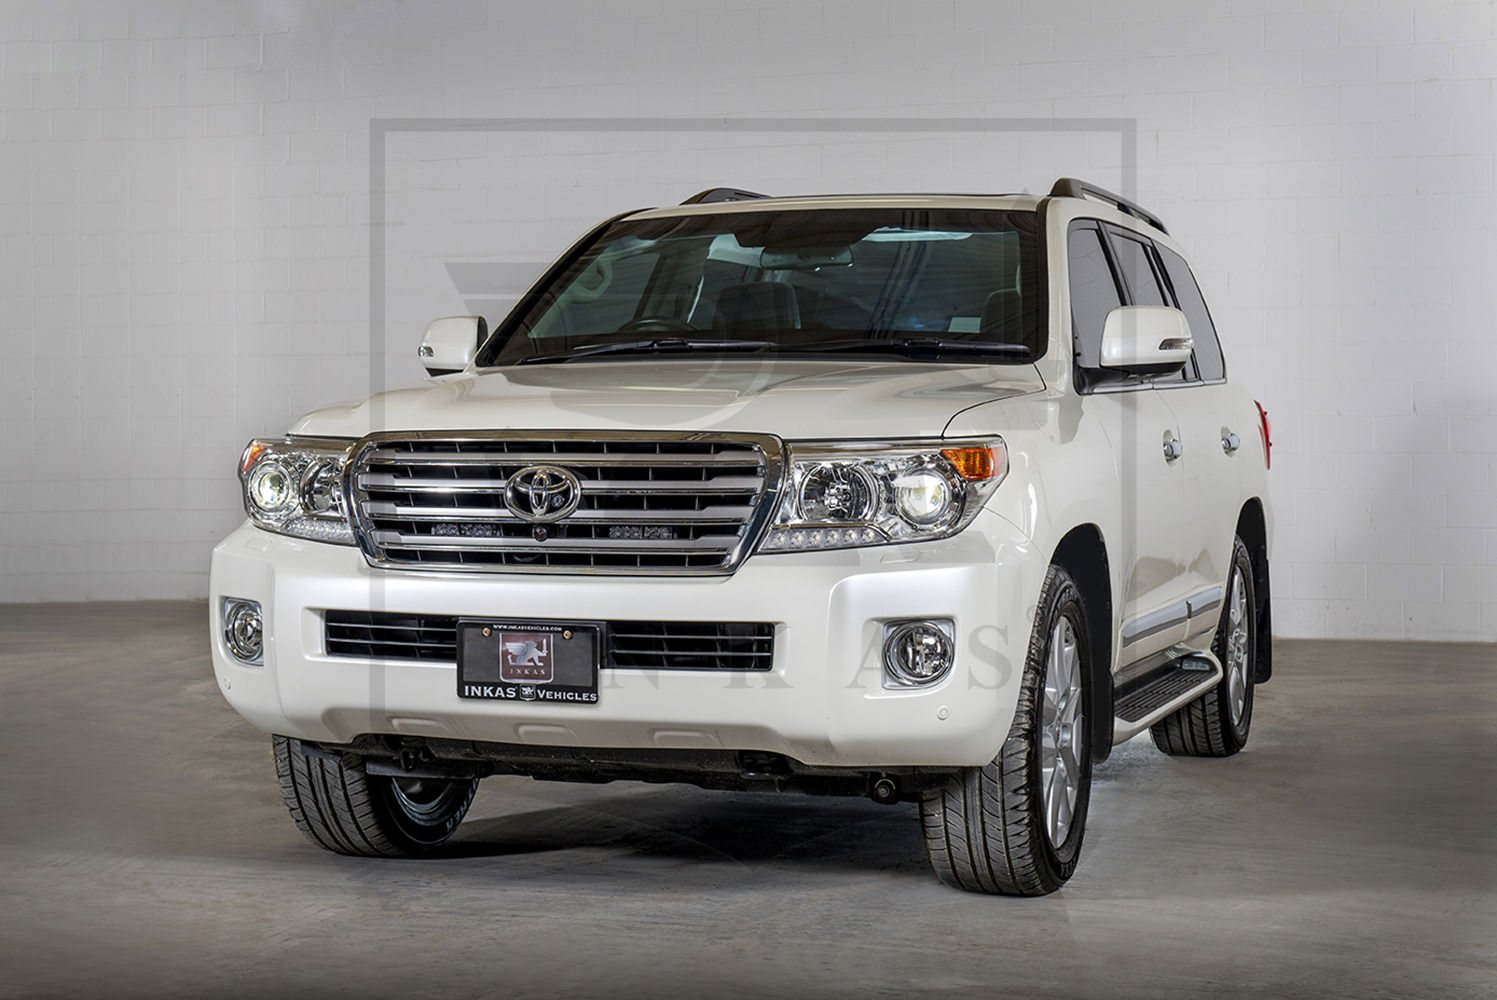 The INKAS® Armored Toyota Land Cruiser GXR INKAS Armored Vehicles,  Bulletproof Cars, Special Purpose Vehicles